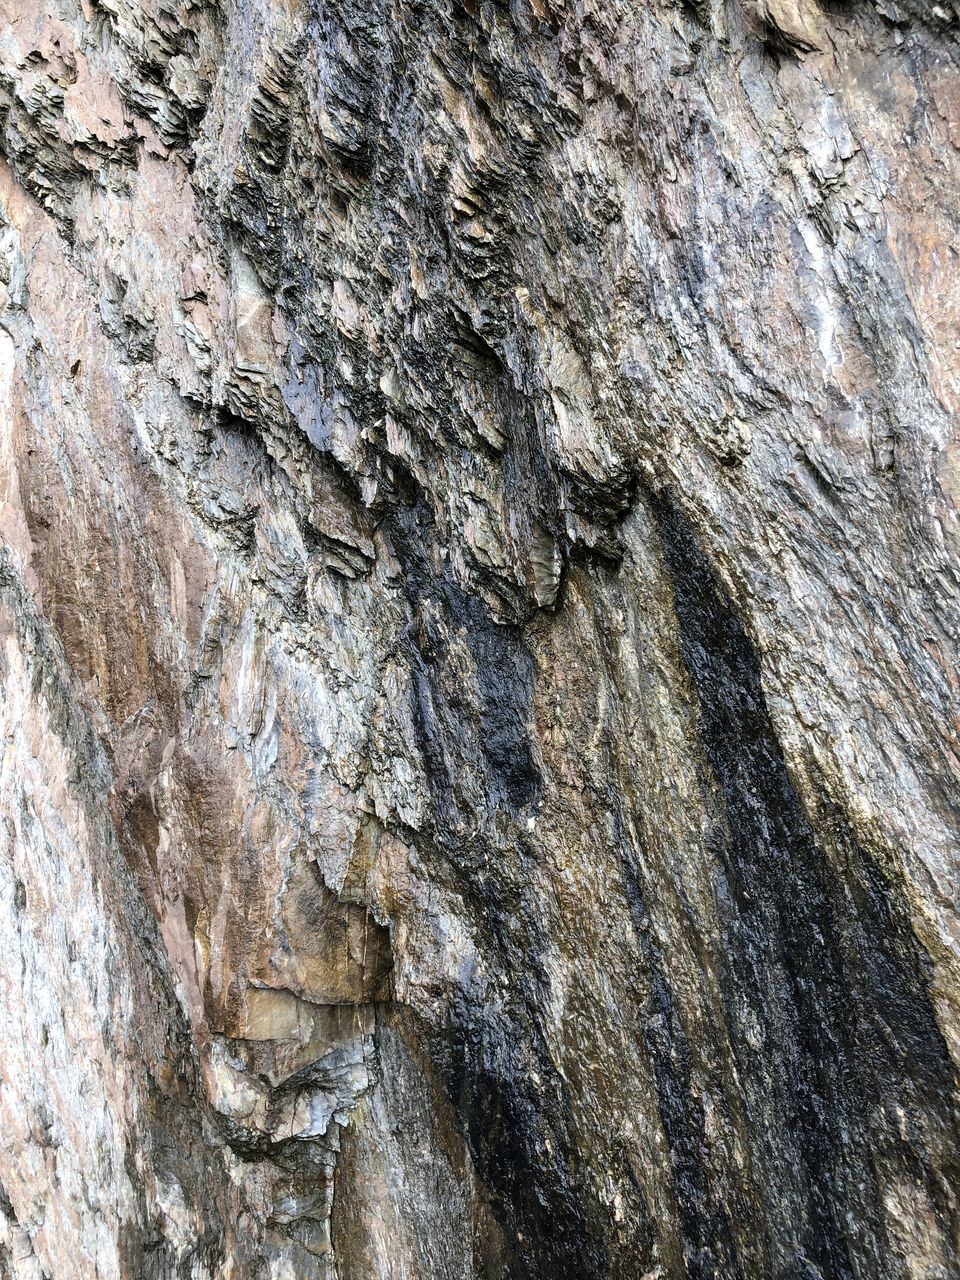 CLOSE-UP OF TREE TRUNK ROCK